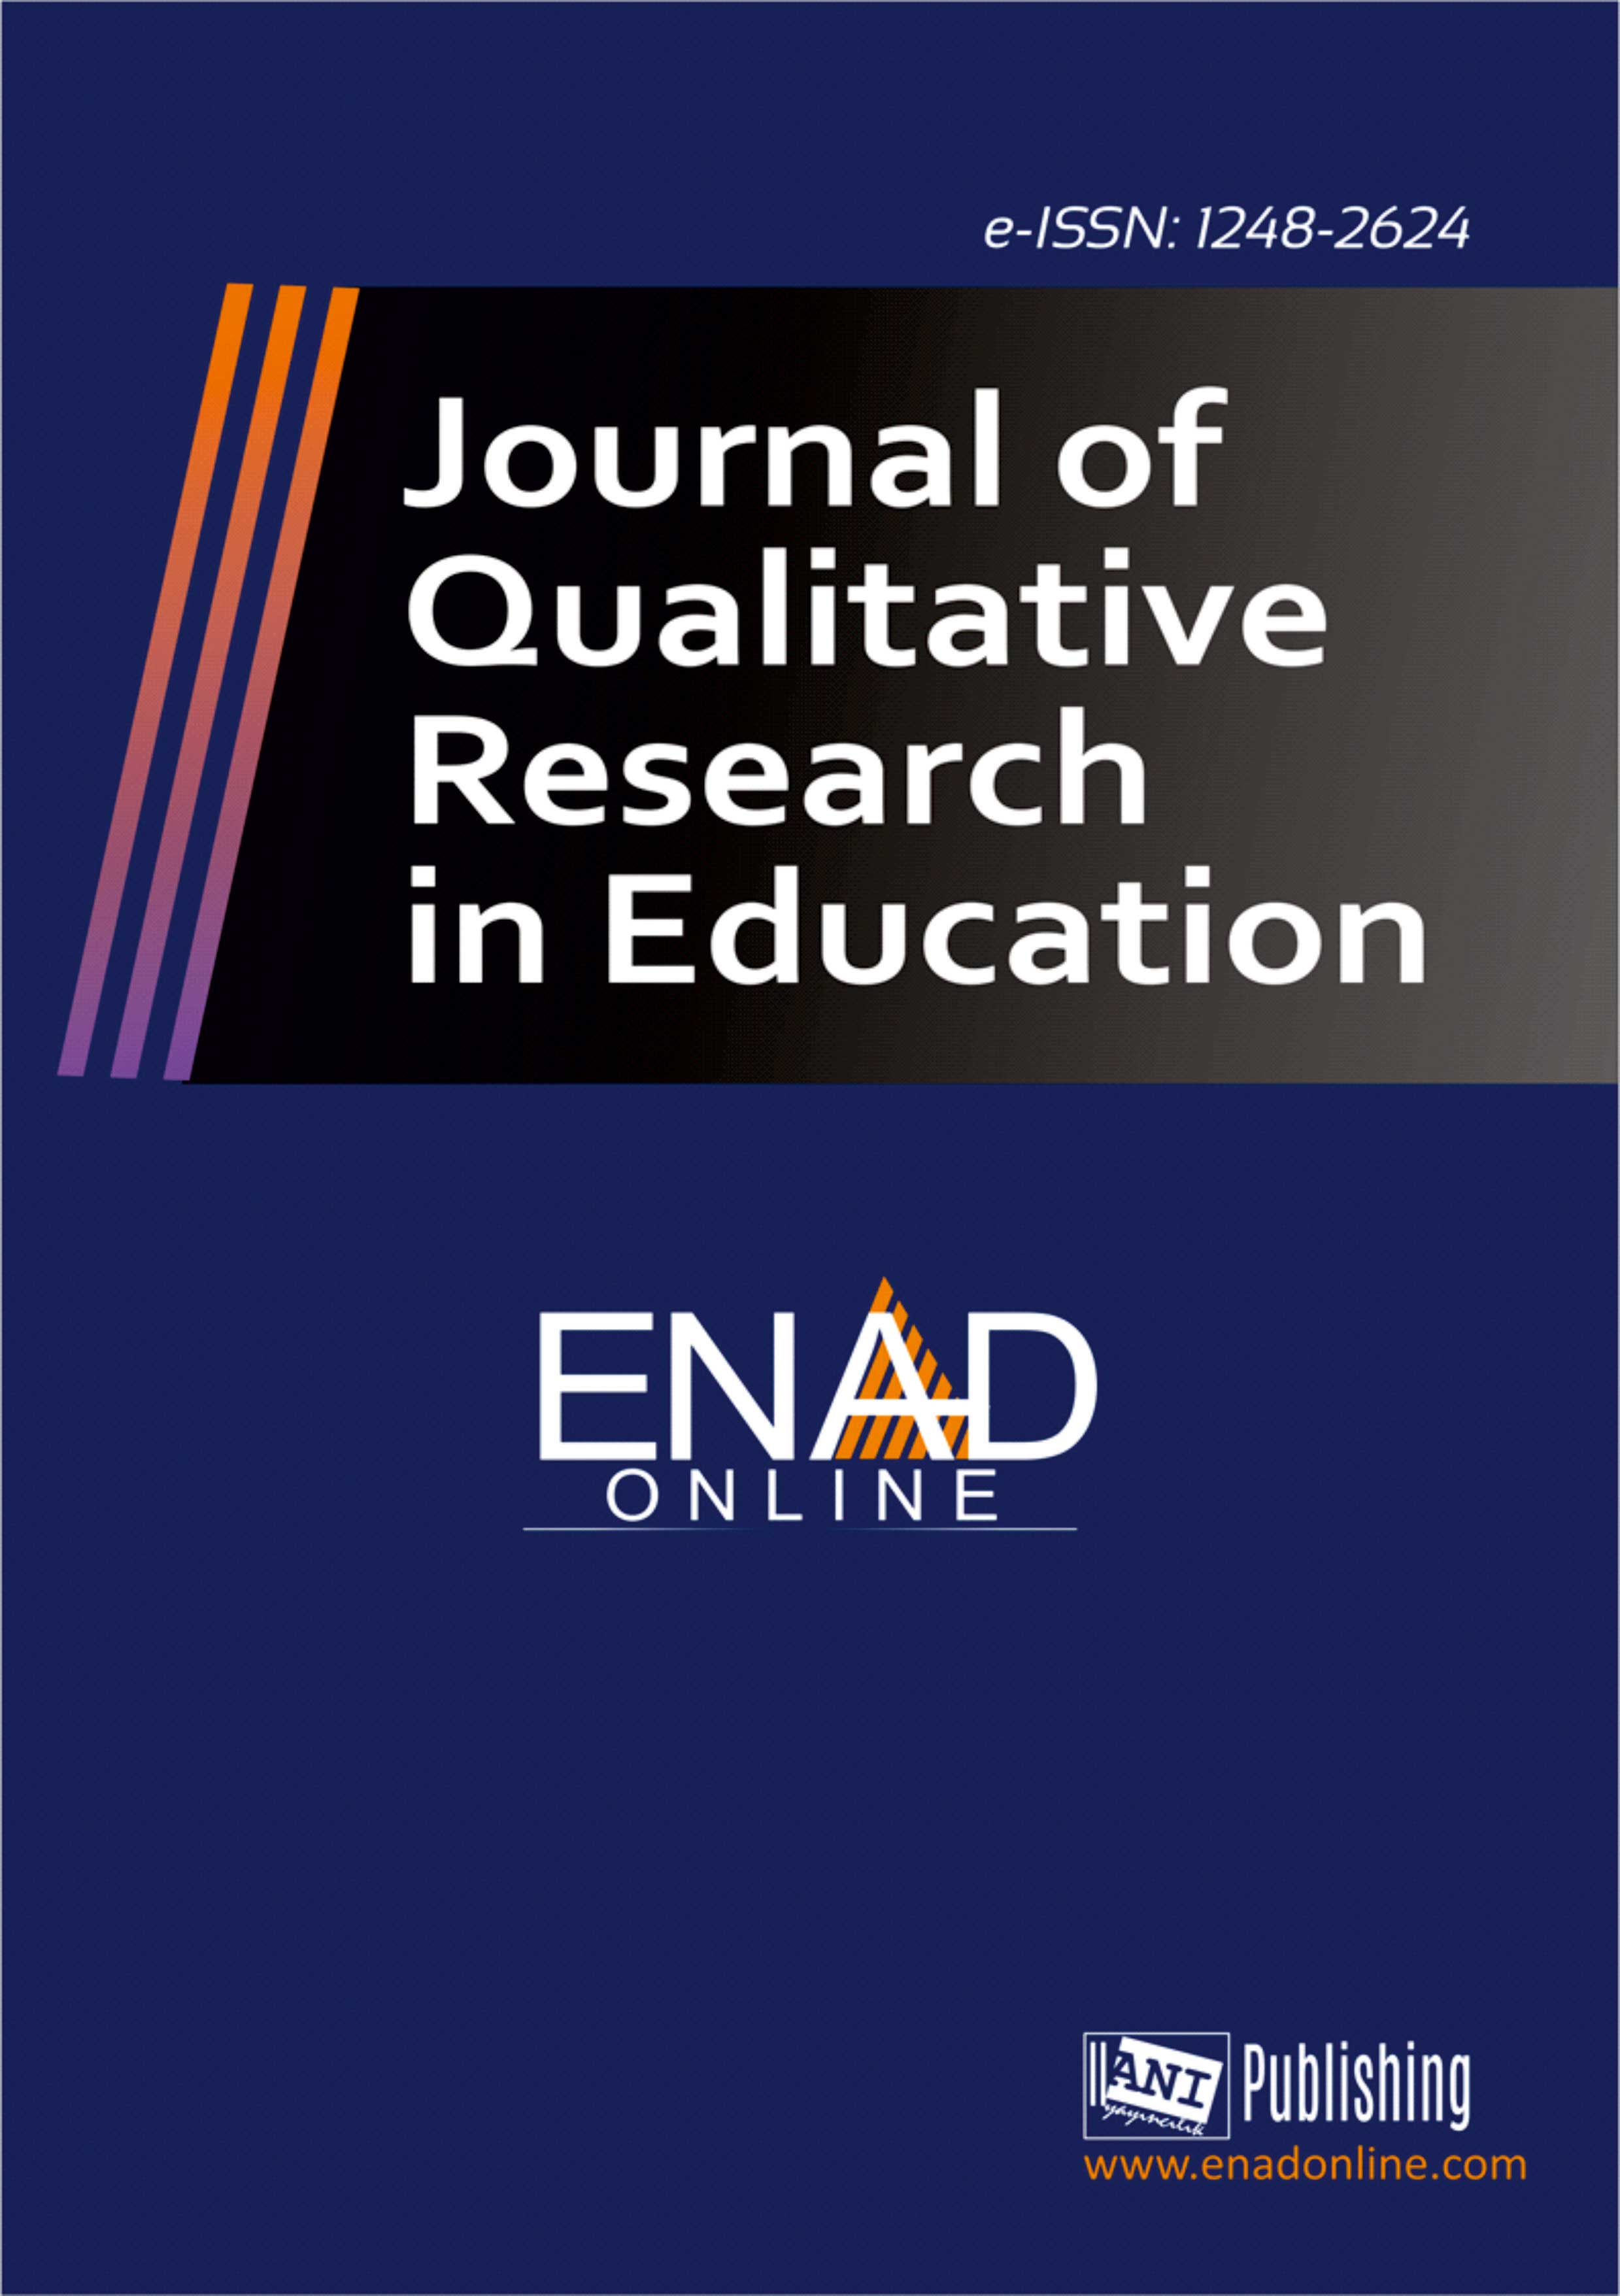 					View Issue 26 (2021): Journal of Qualitative Research in Education
				